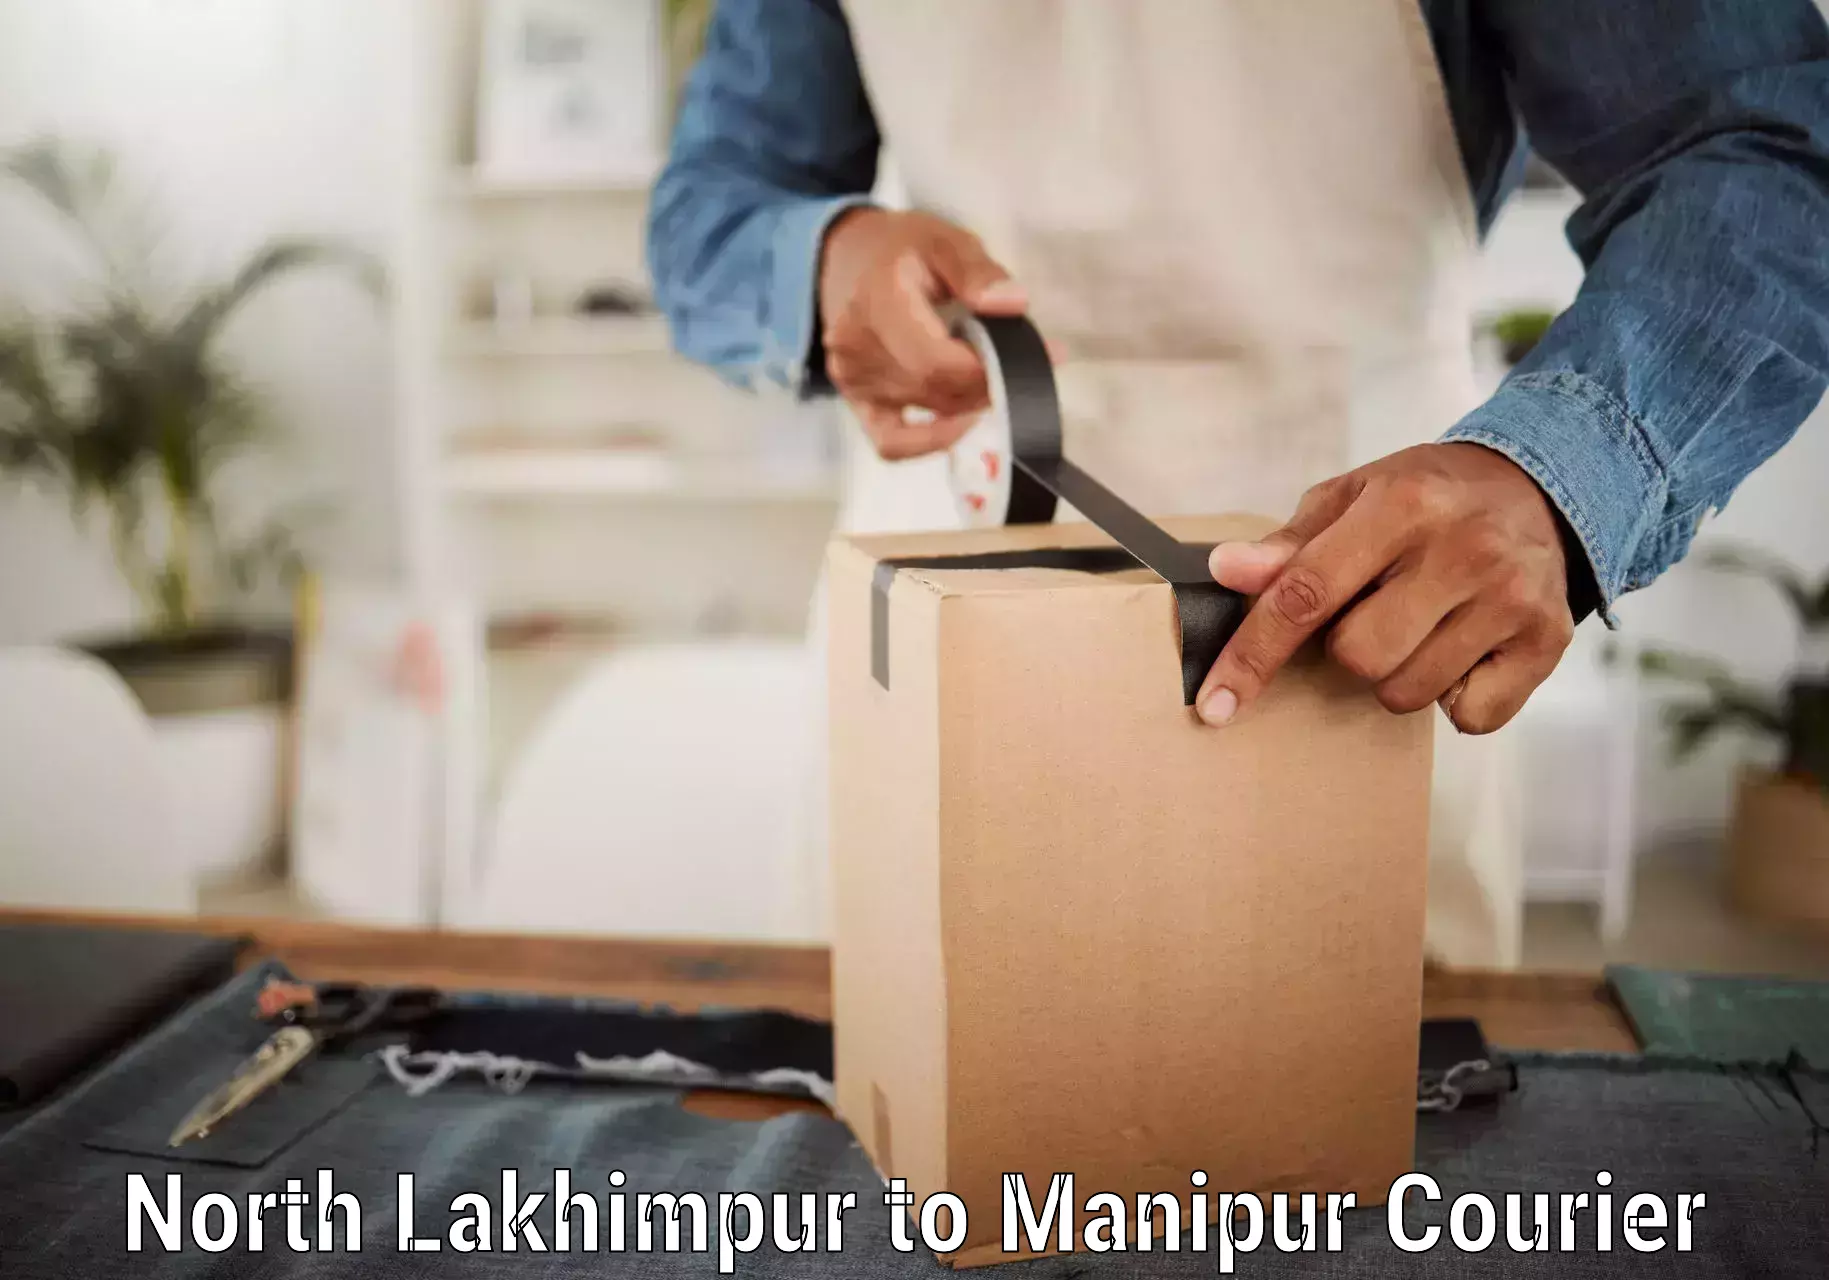 Custom courier packaging North Lakhimpur to Tamenglong